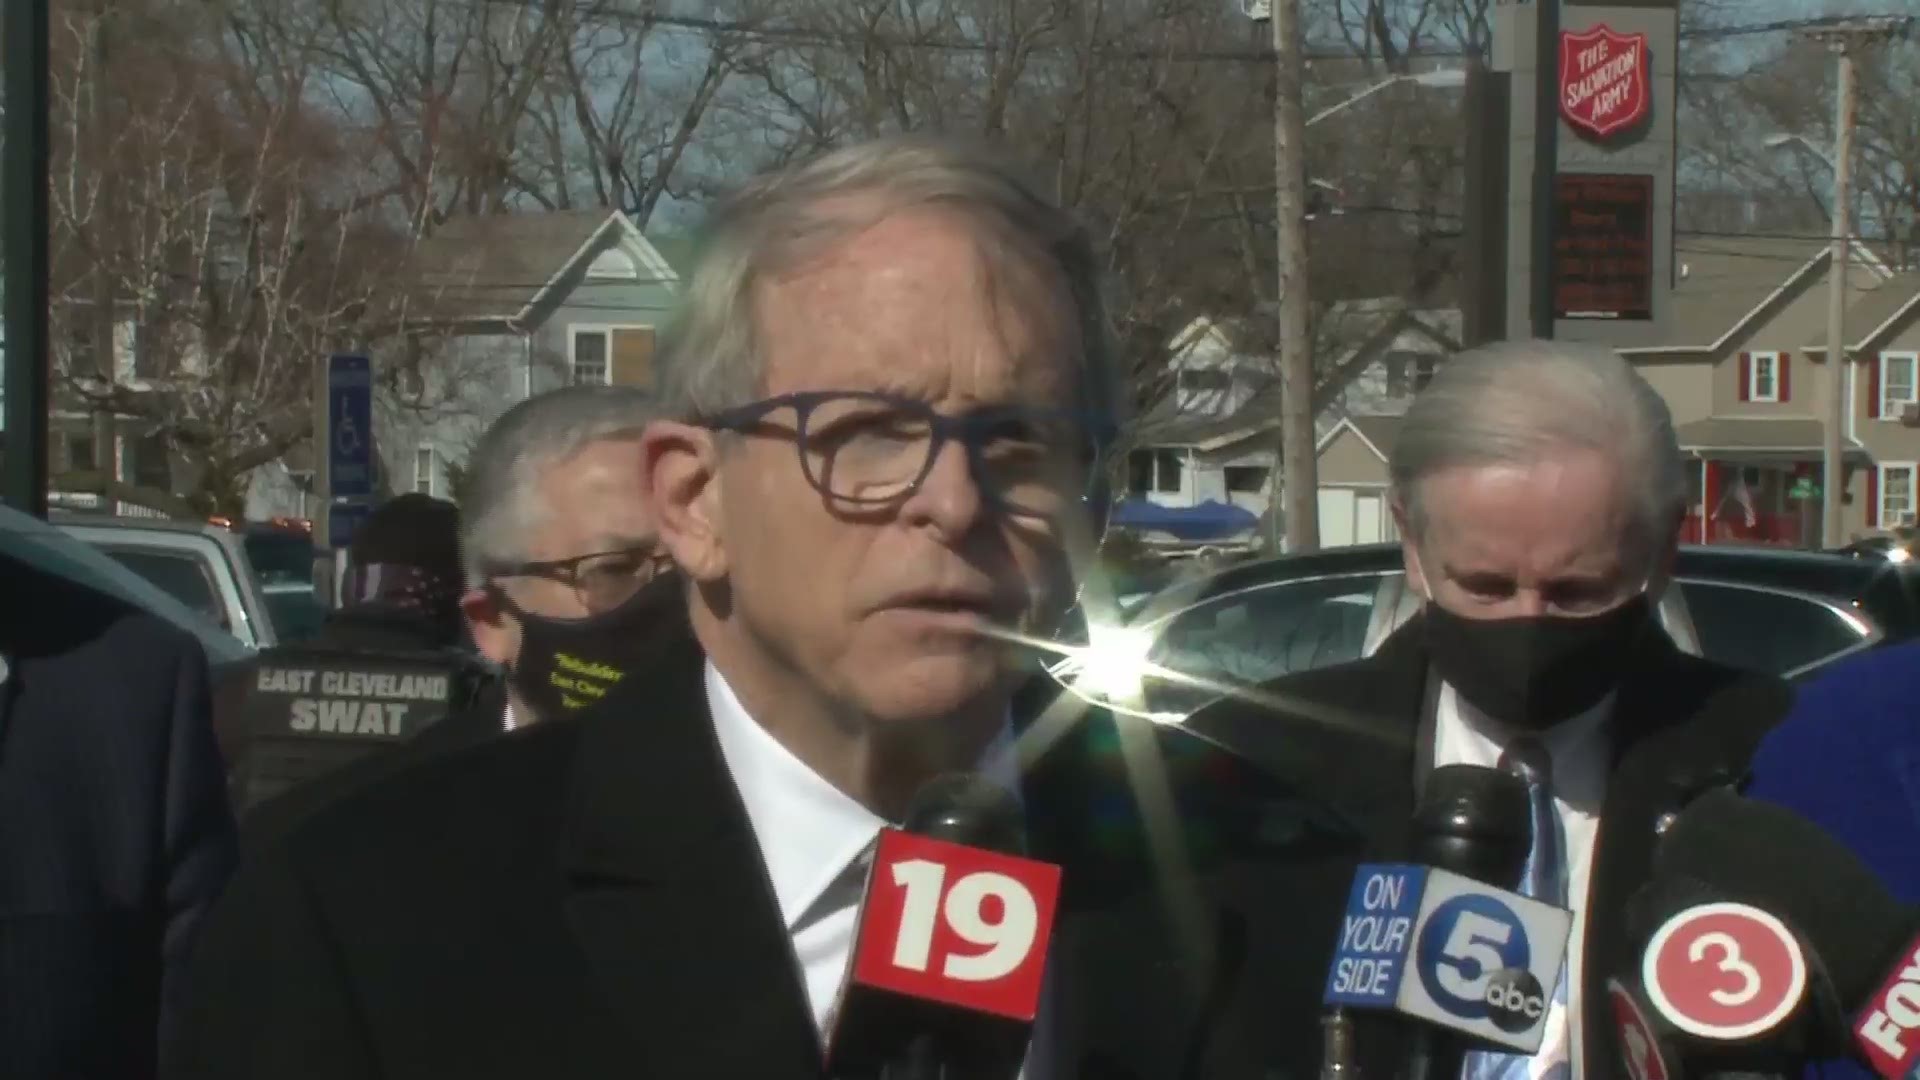 Ohio Governor Mike DeWine visited East Cleveland on Friday.  Over 300 pre-registered people got vaccinated today.